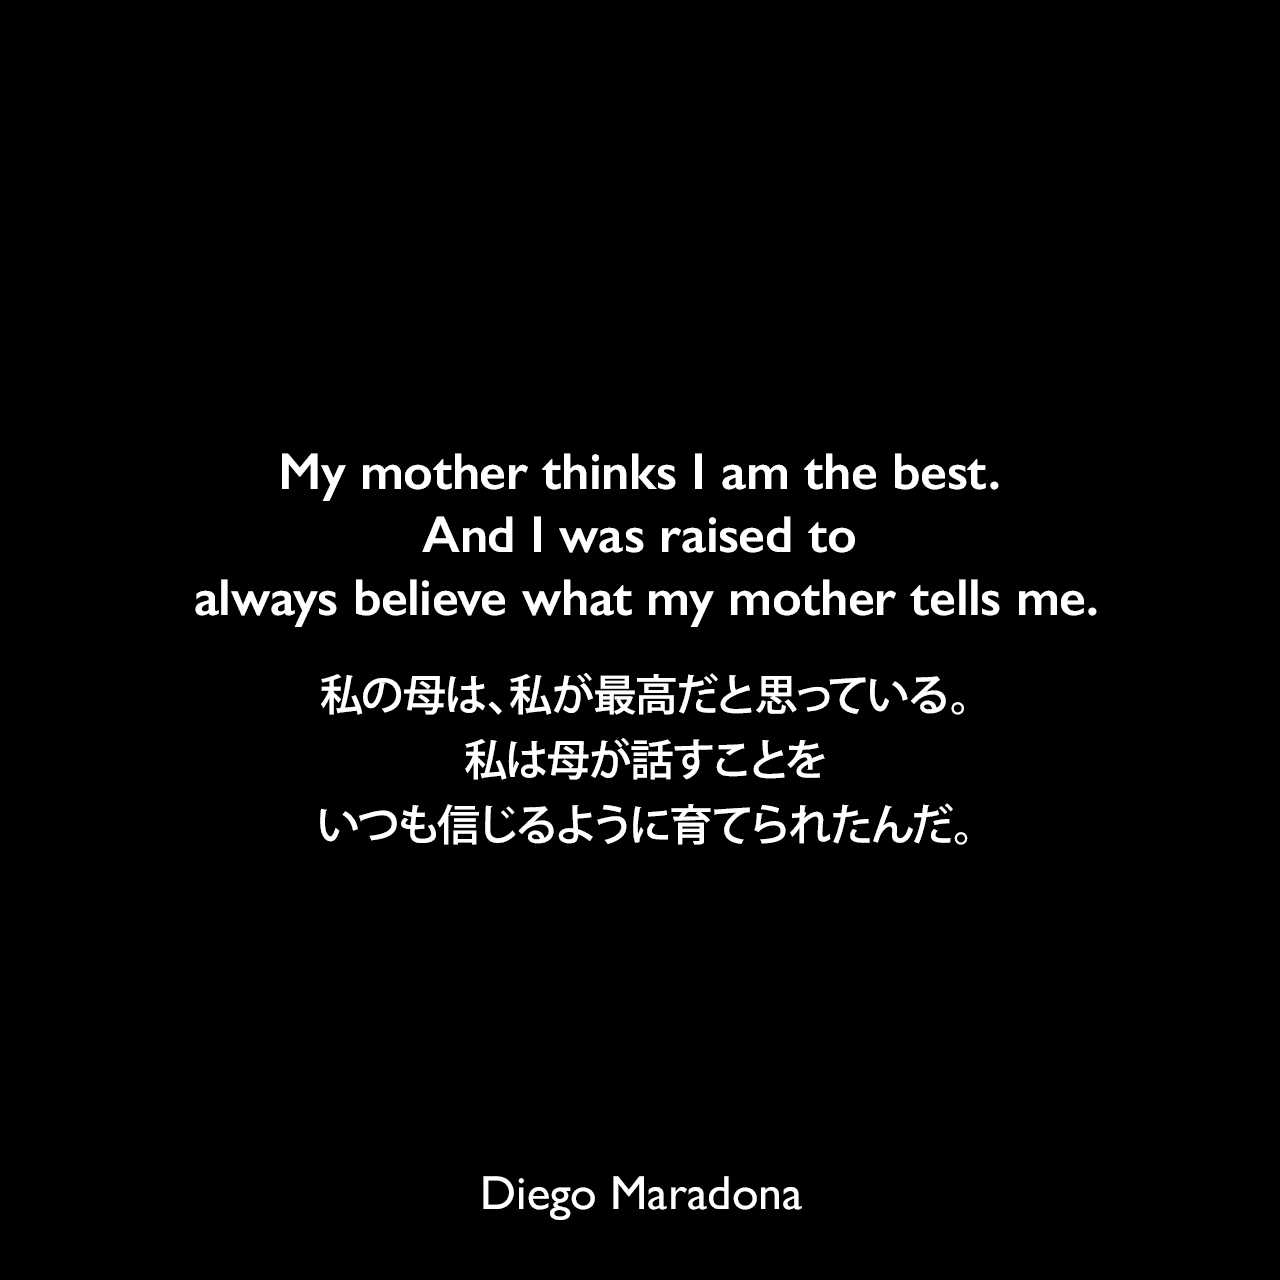 My mother thinks I am the best. And I was raised to always believe what my mother tells me.私の母は、私が最高だと思っている。私は母が話すことをいつも信じるように育てられたんだ。